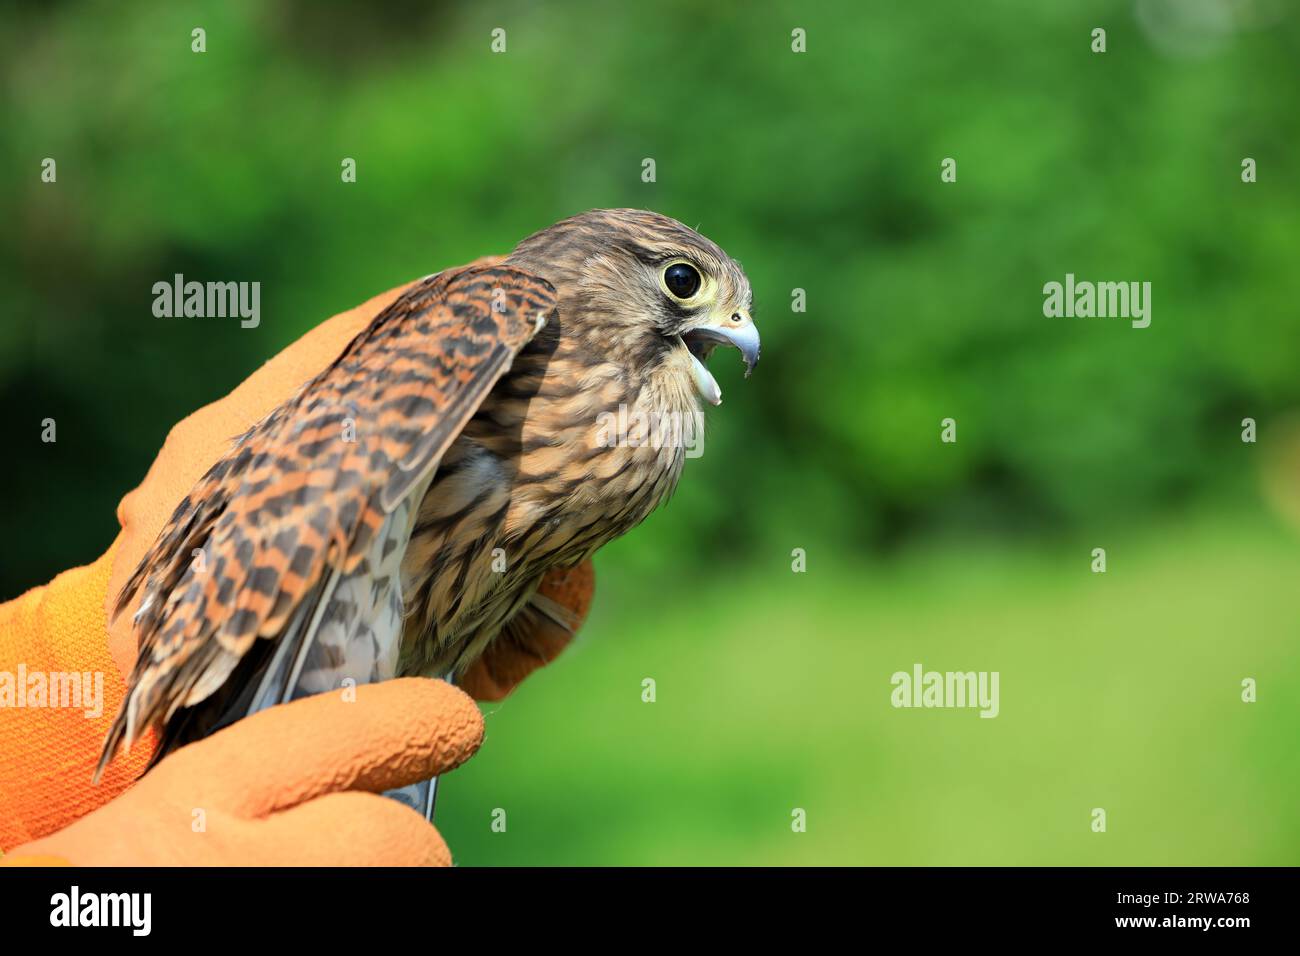 Wild Bird Rescue Workers Hold Red Falcon in Their Hands for Observation, China Stock Photo